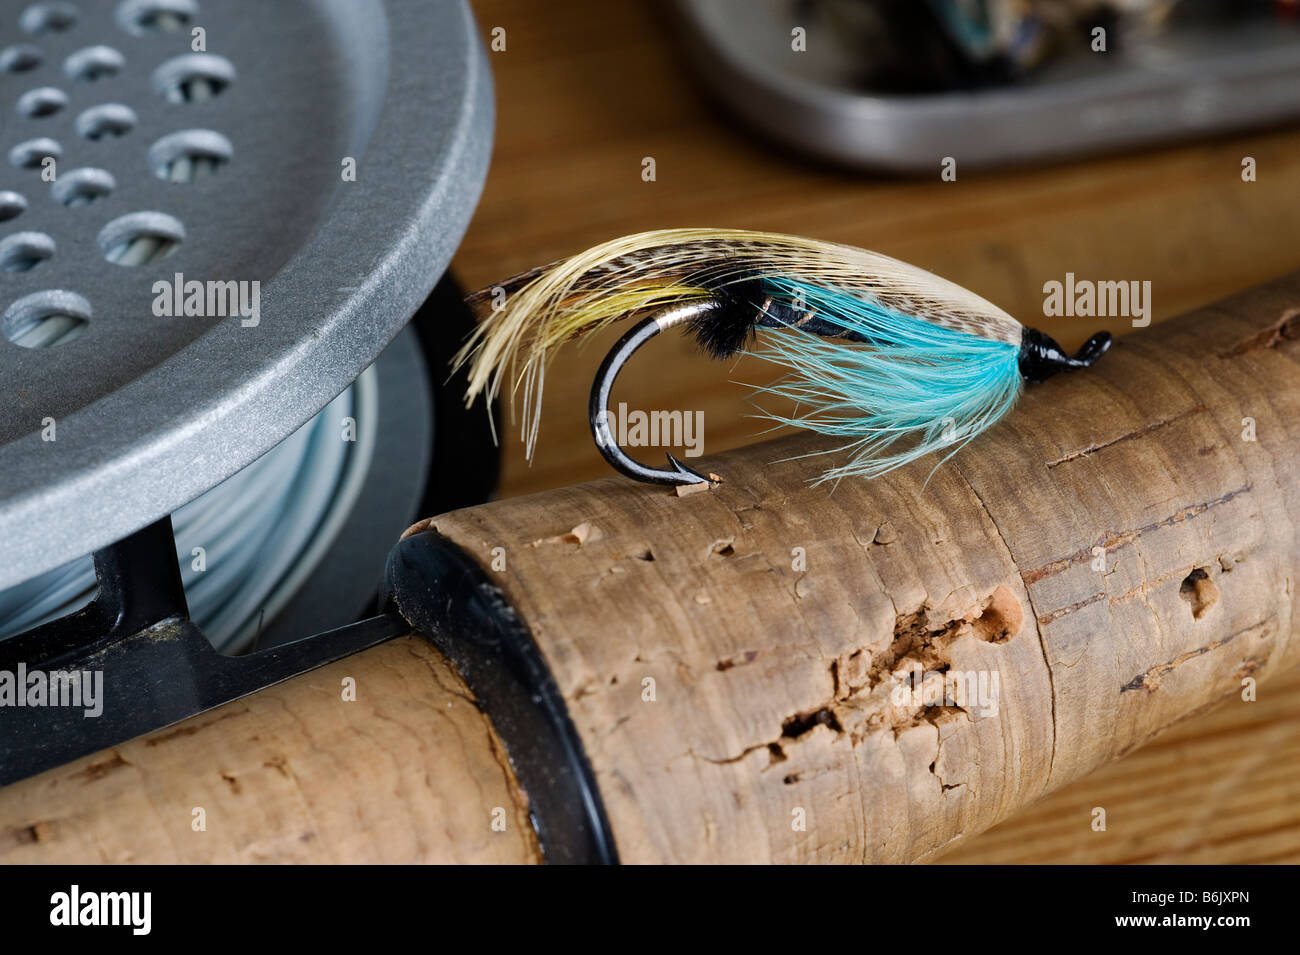 UK.  A salmon fly stuck into the cork handle of a fly fishing rod. Stock Photo